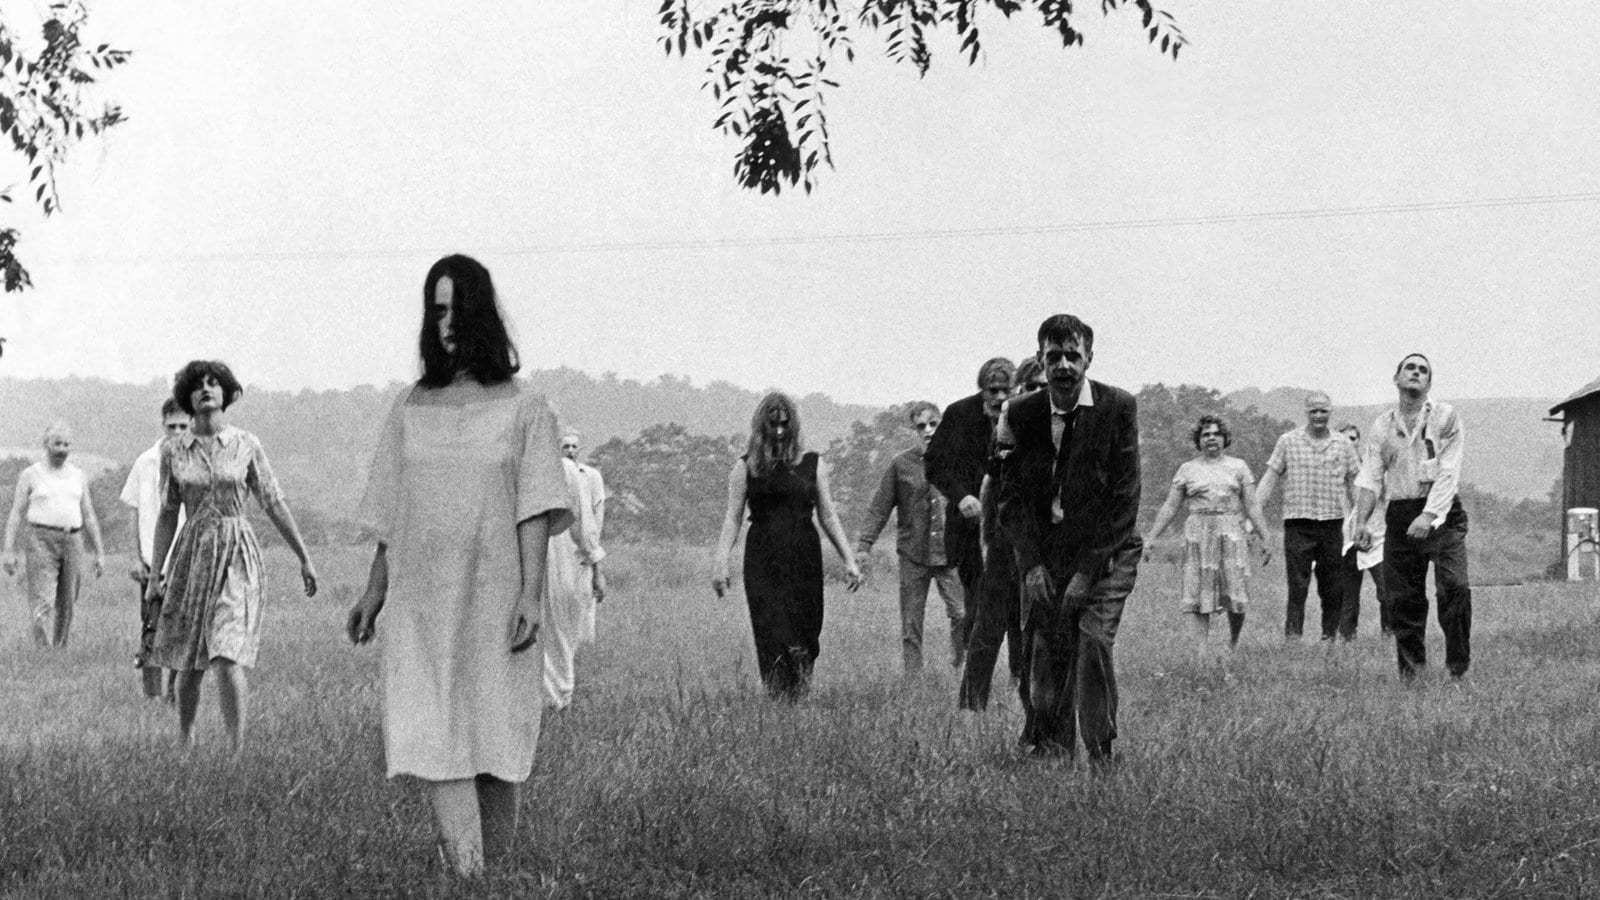 Is your Customer Service like Night of the Living Dead?